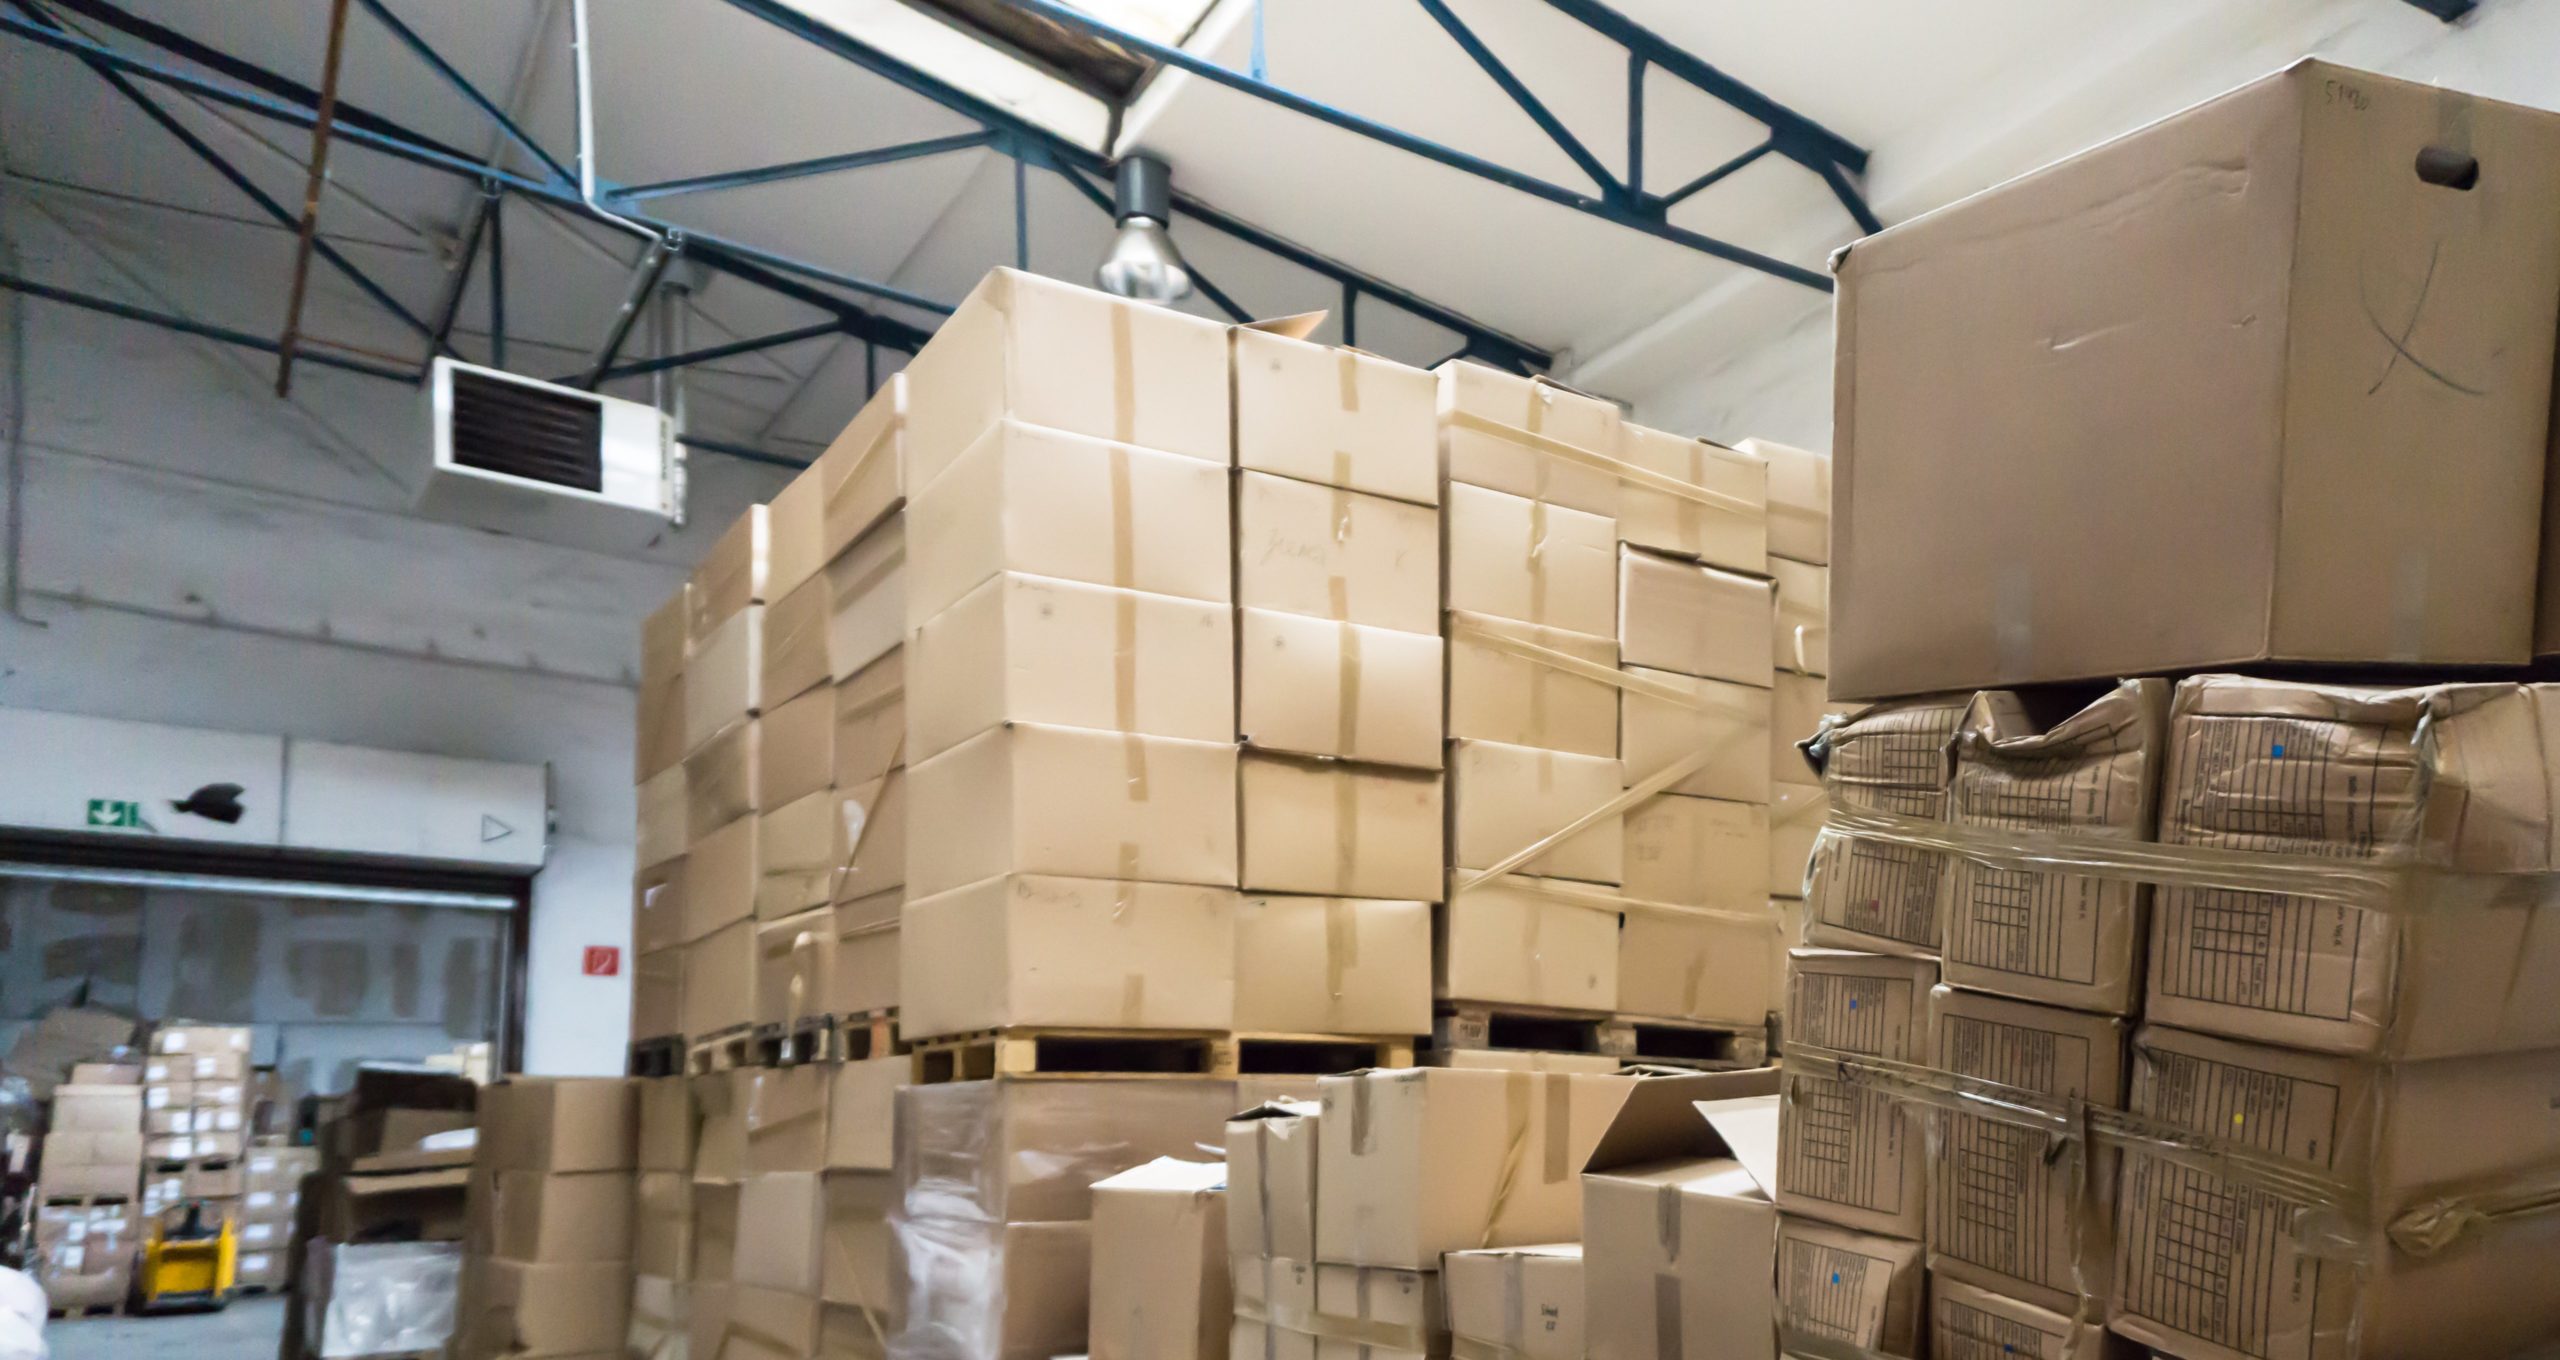 Excessive inventory can quickly turn to dead inventory and hurt your bottom line